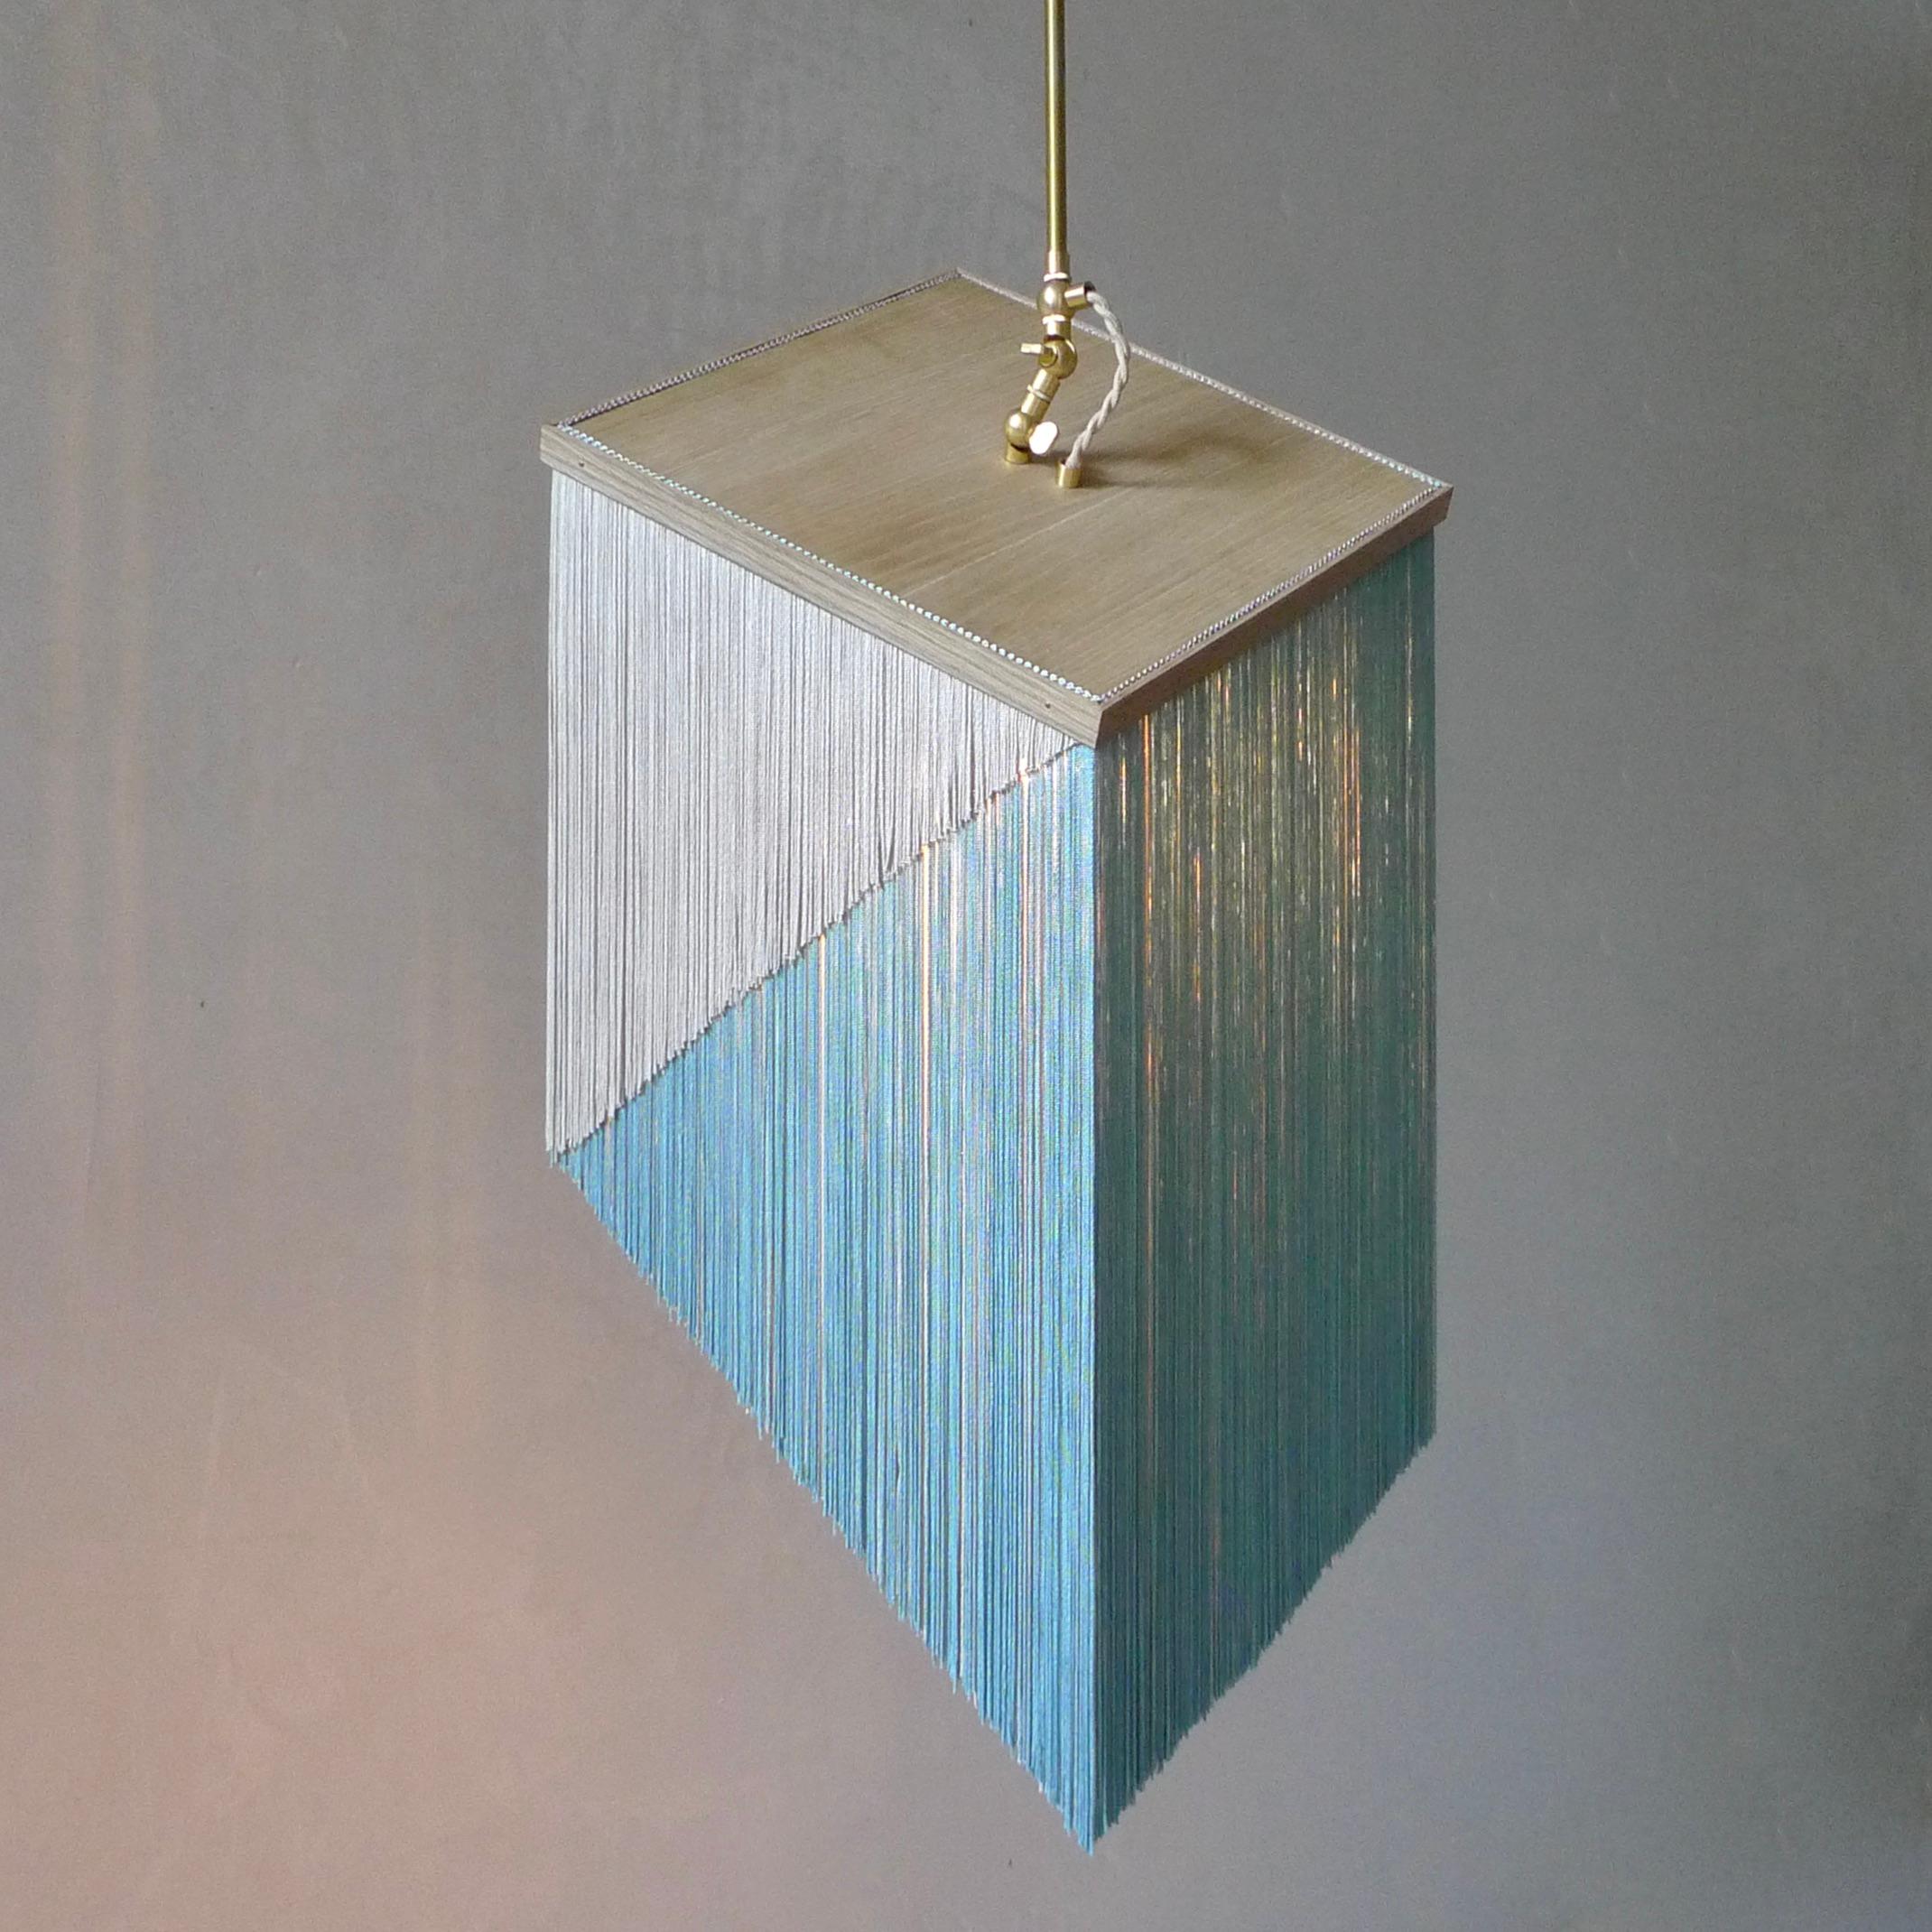 No. 25 Pendant Lamp by Sander Bottinga
Objet size 3
Dimensions: H 46 -80 x W 31 x D 31 cm
Materials: Brass, Wood, Leather, Viscose Fringes
Variations available.

Handmade in brass, wood, leather and 3 double layered viscose fringes in
geometric cut